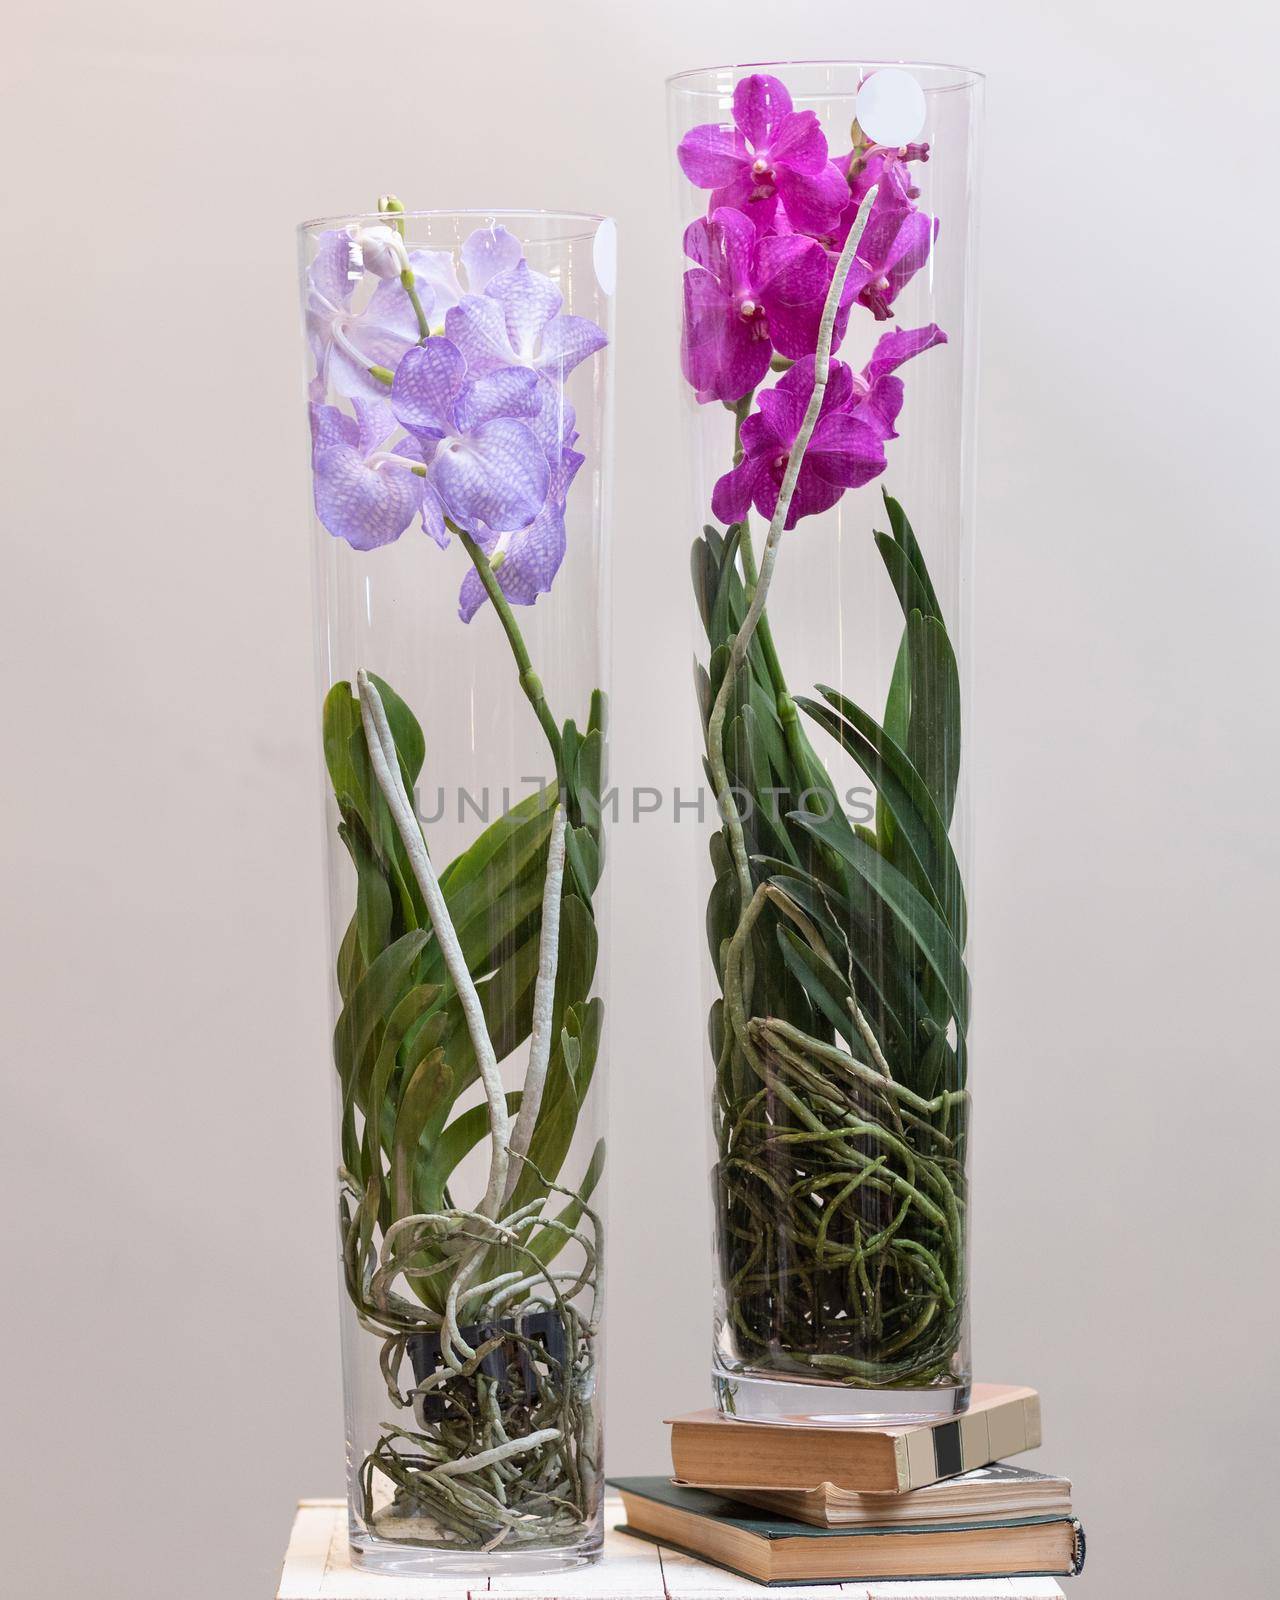 Two colorful Singapore orchid, Vanda orchid in the glass pot by ferhad